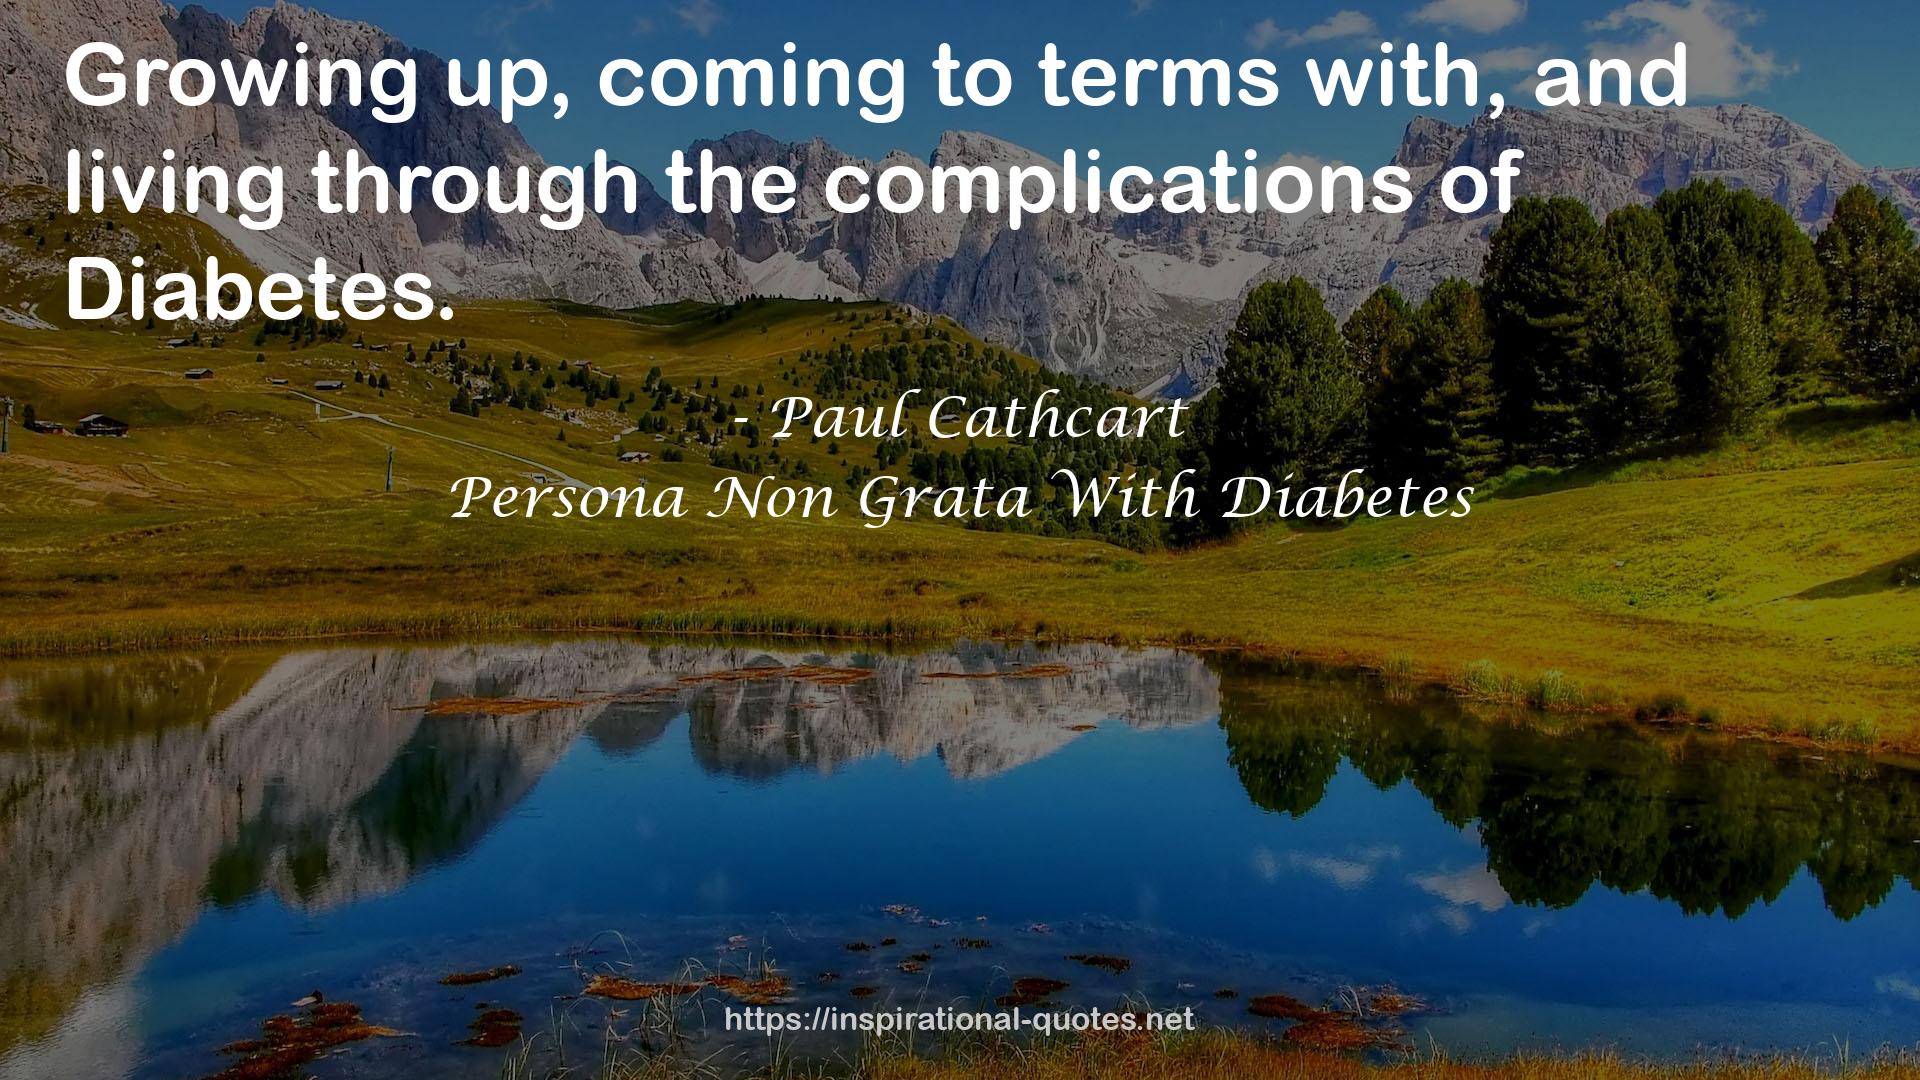 Paul Cathcart QUOTES